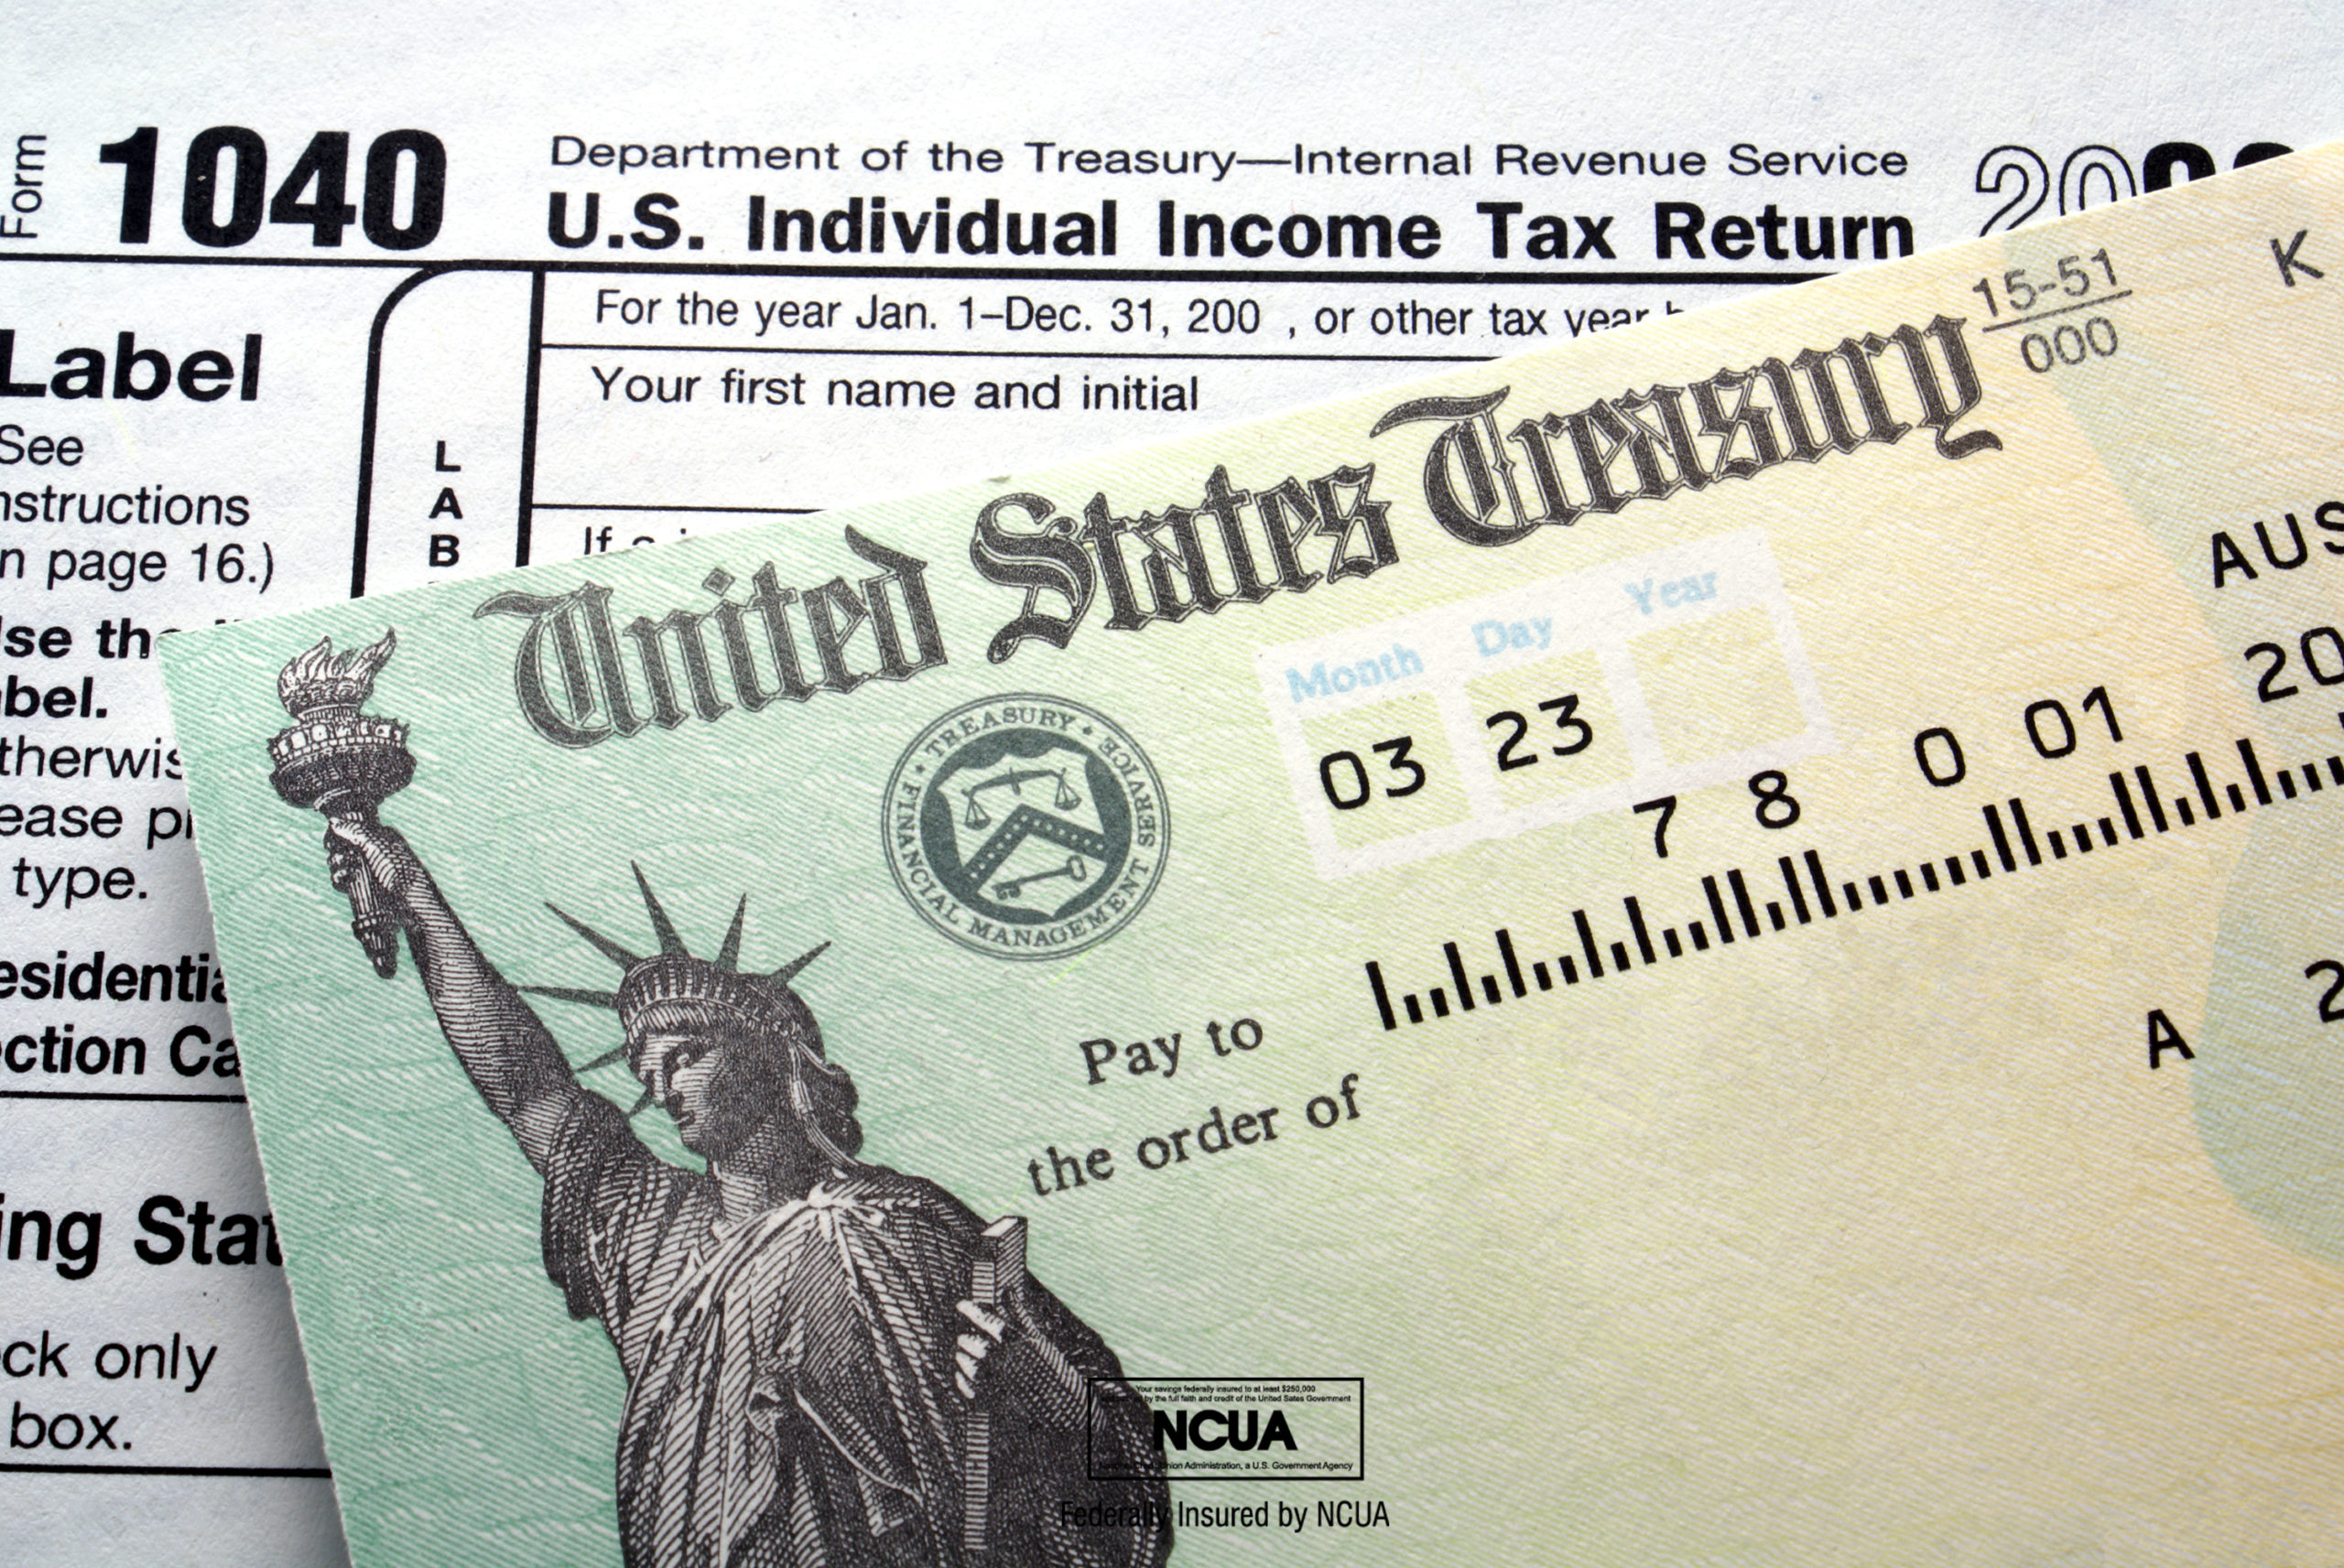 Following are several tax deductions you may wish to consider.